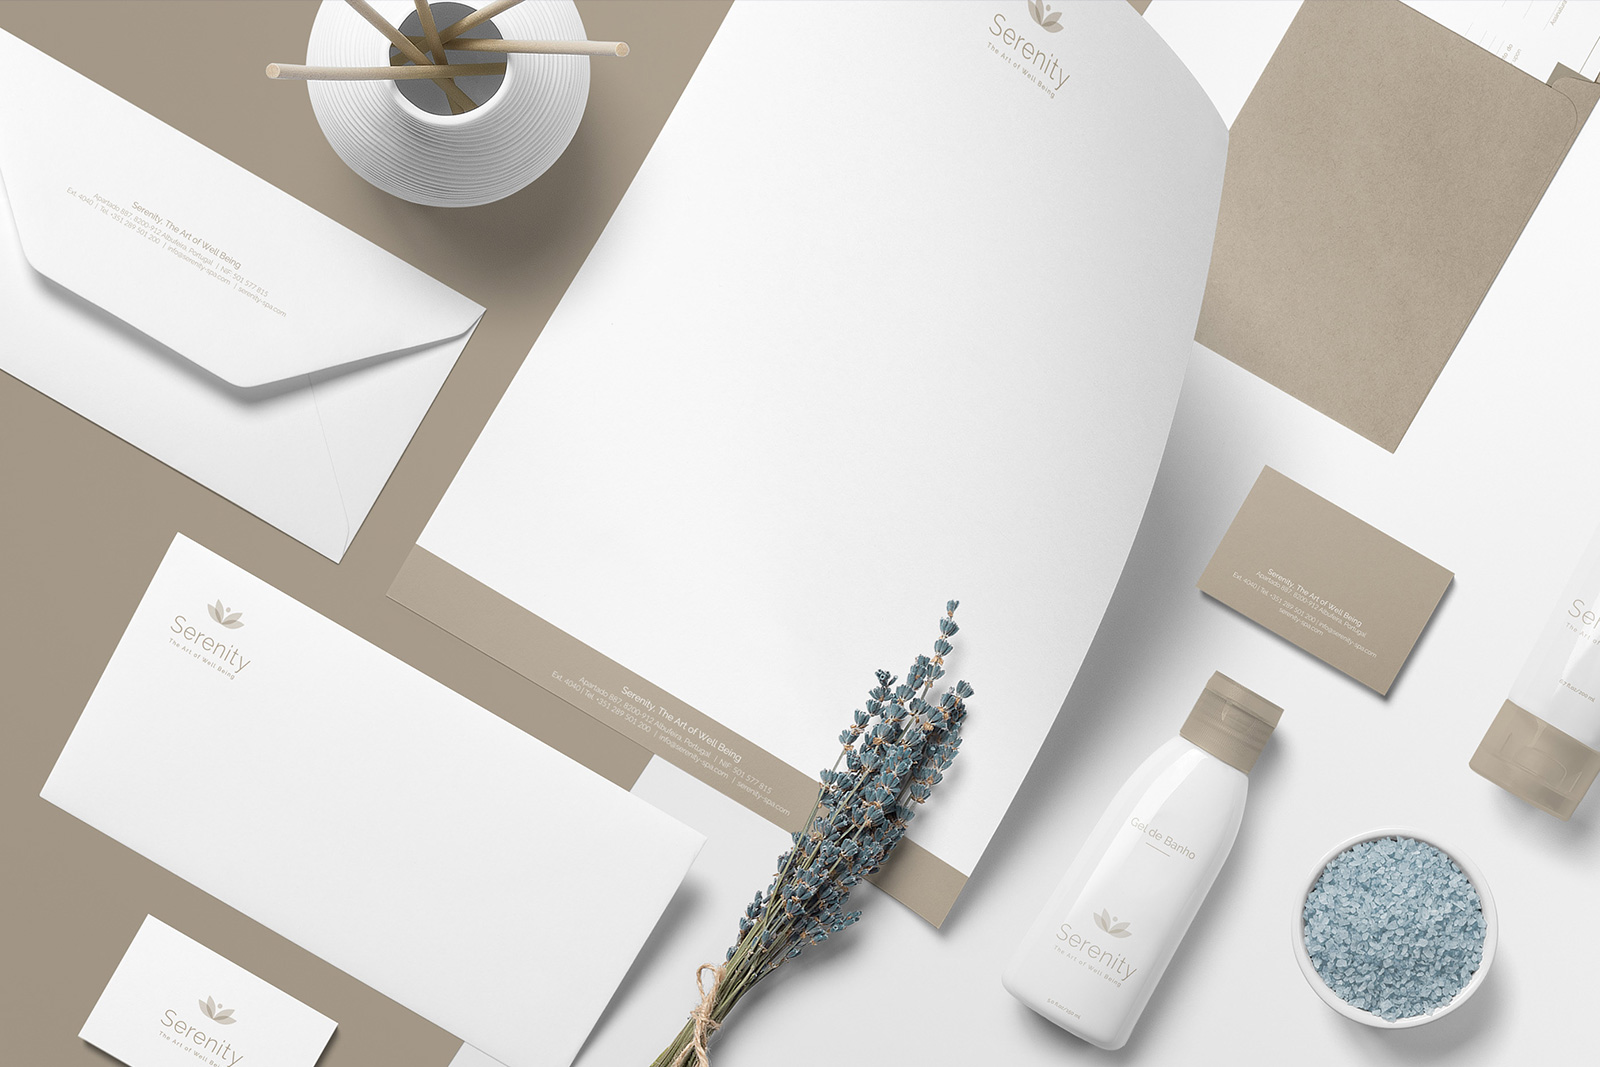 Brand stationery for Serenity - The Art of Wellbeing